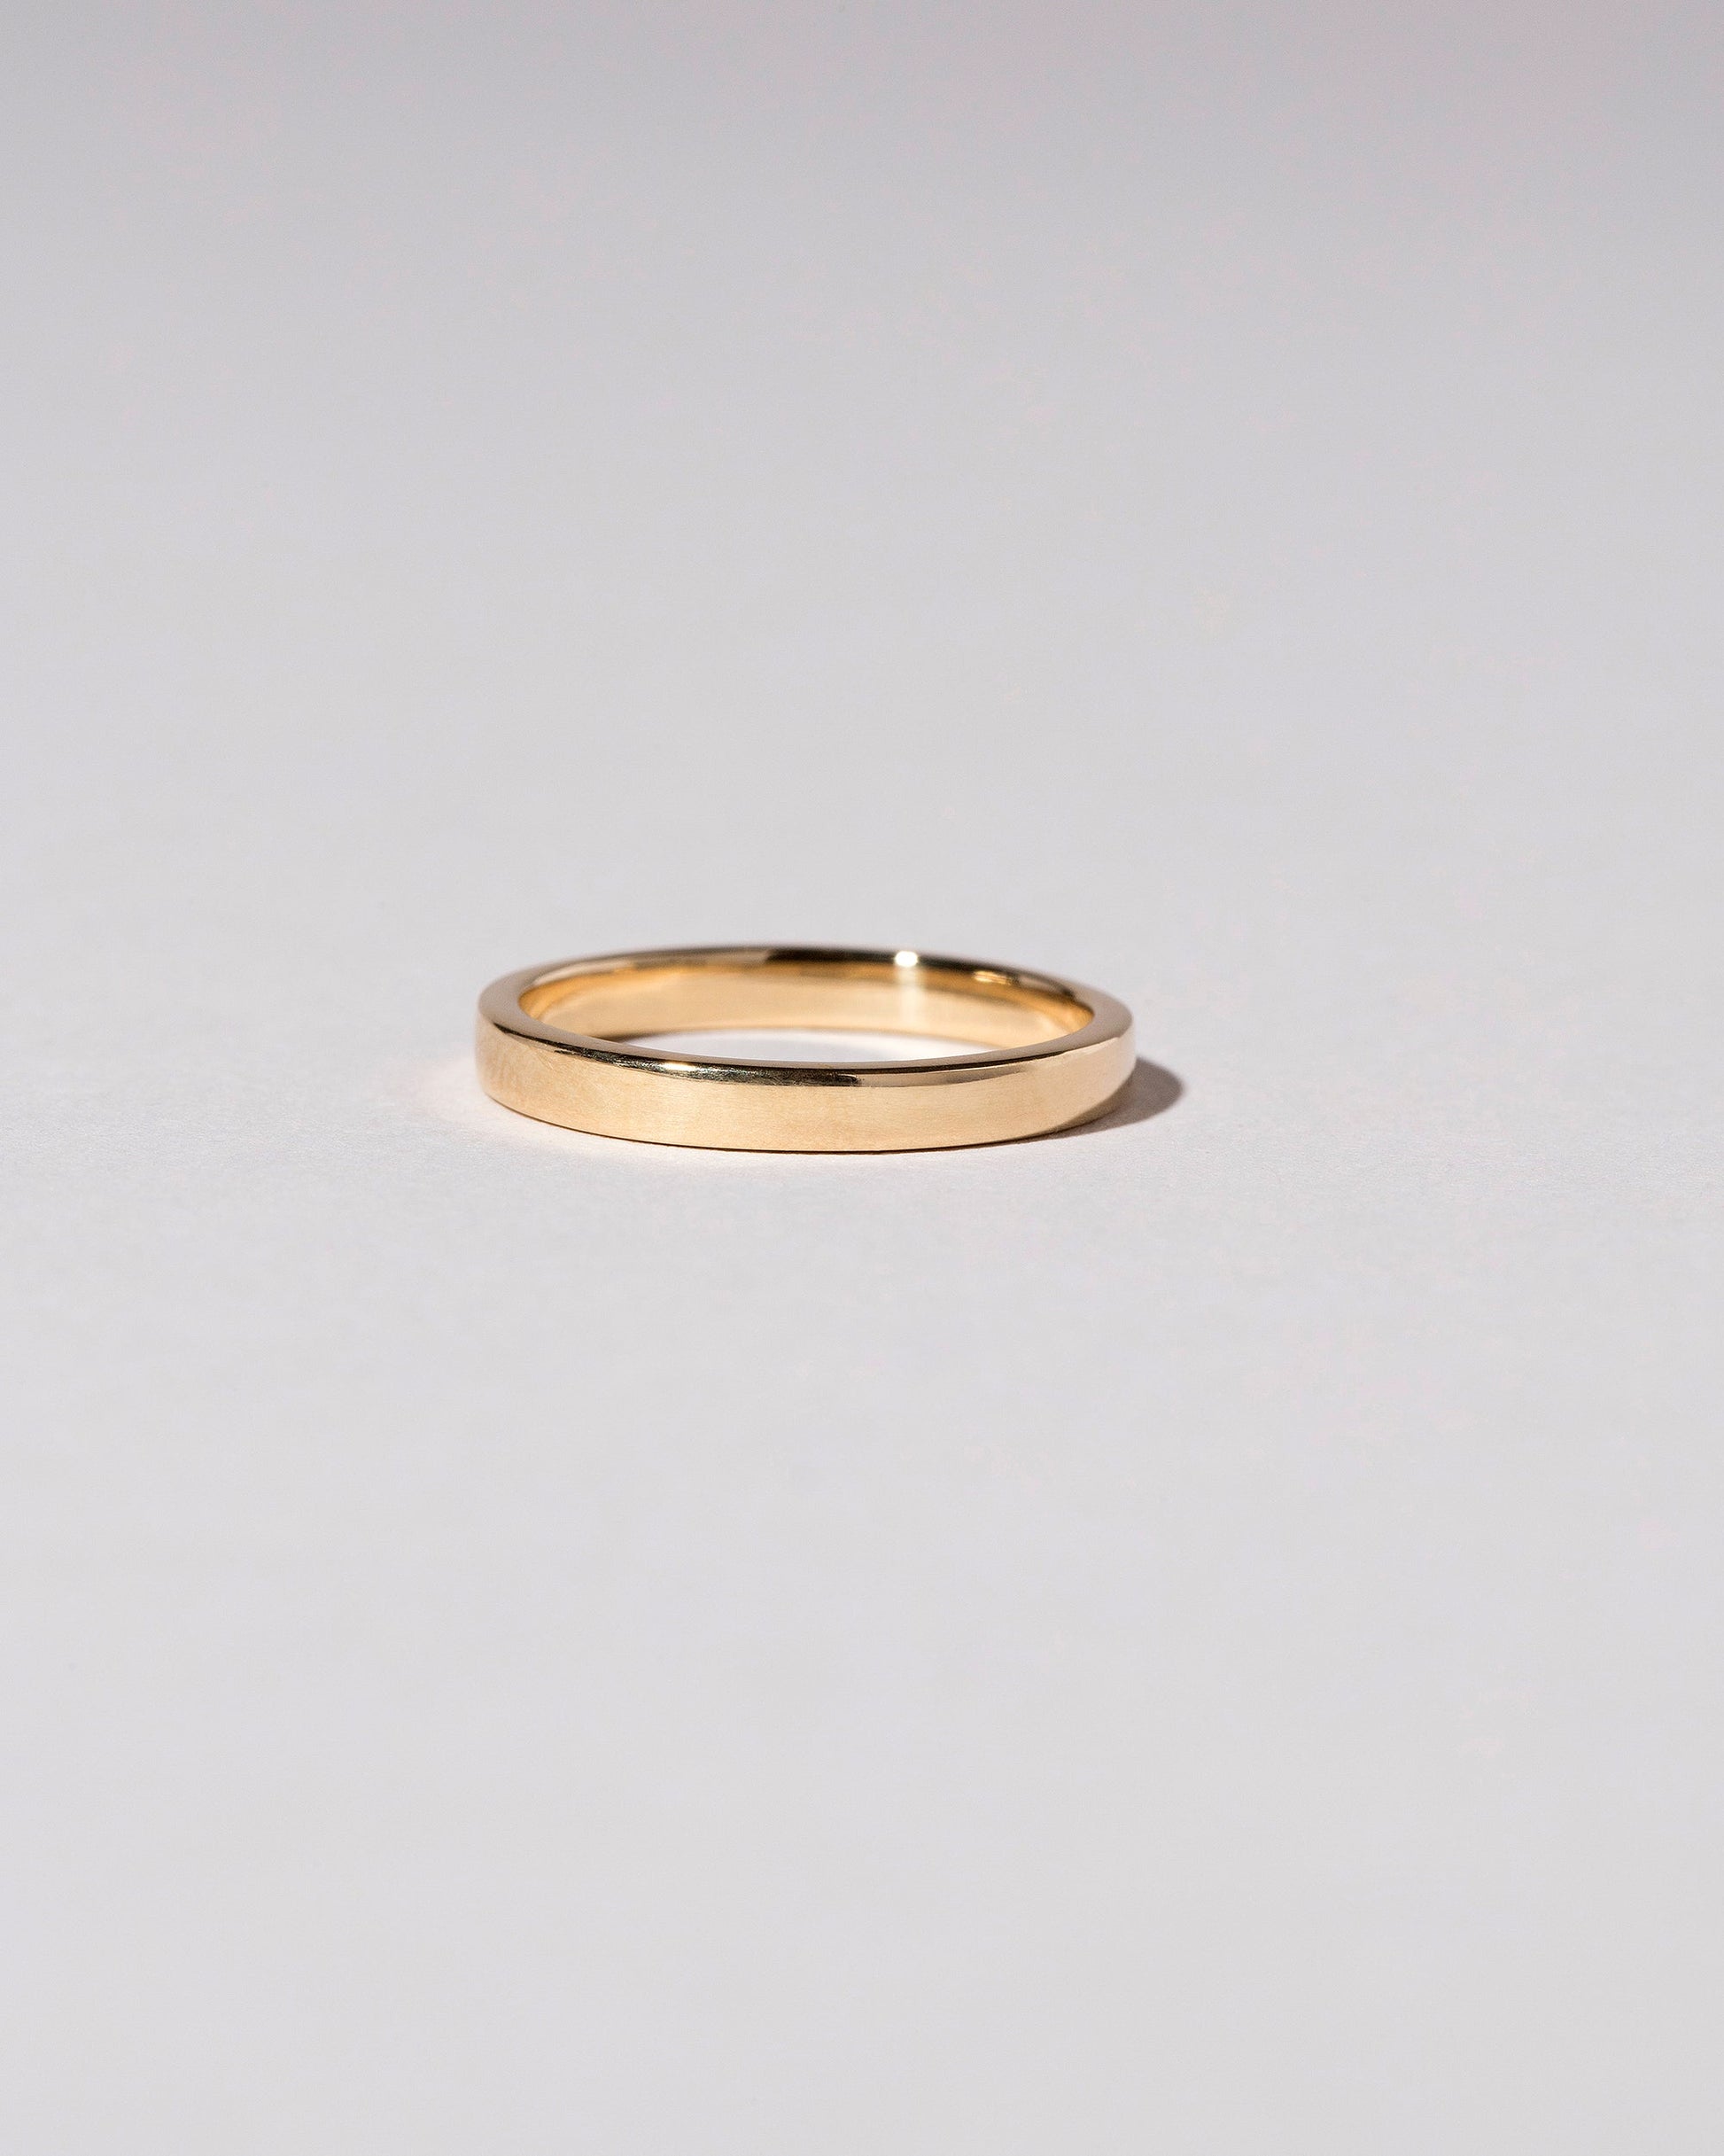 Gold 2.5mm Square Wire Band on light color background.